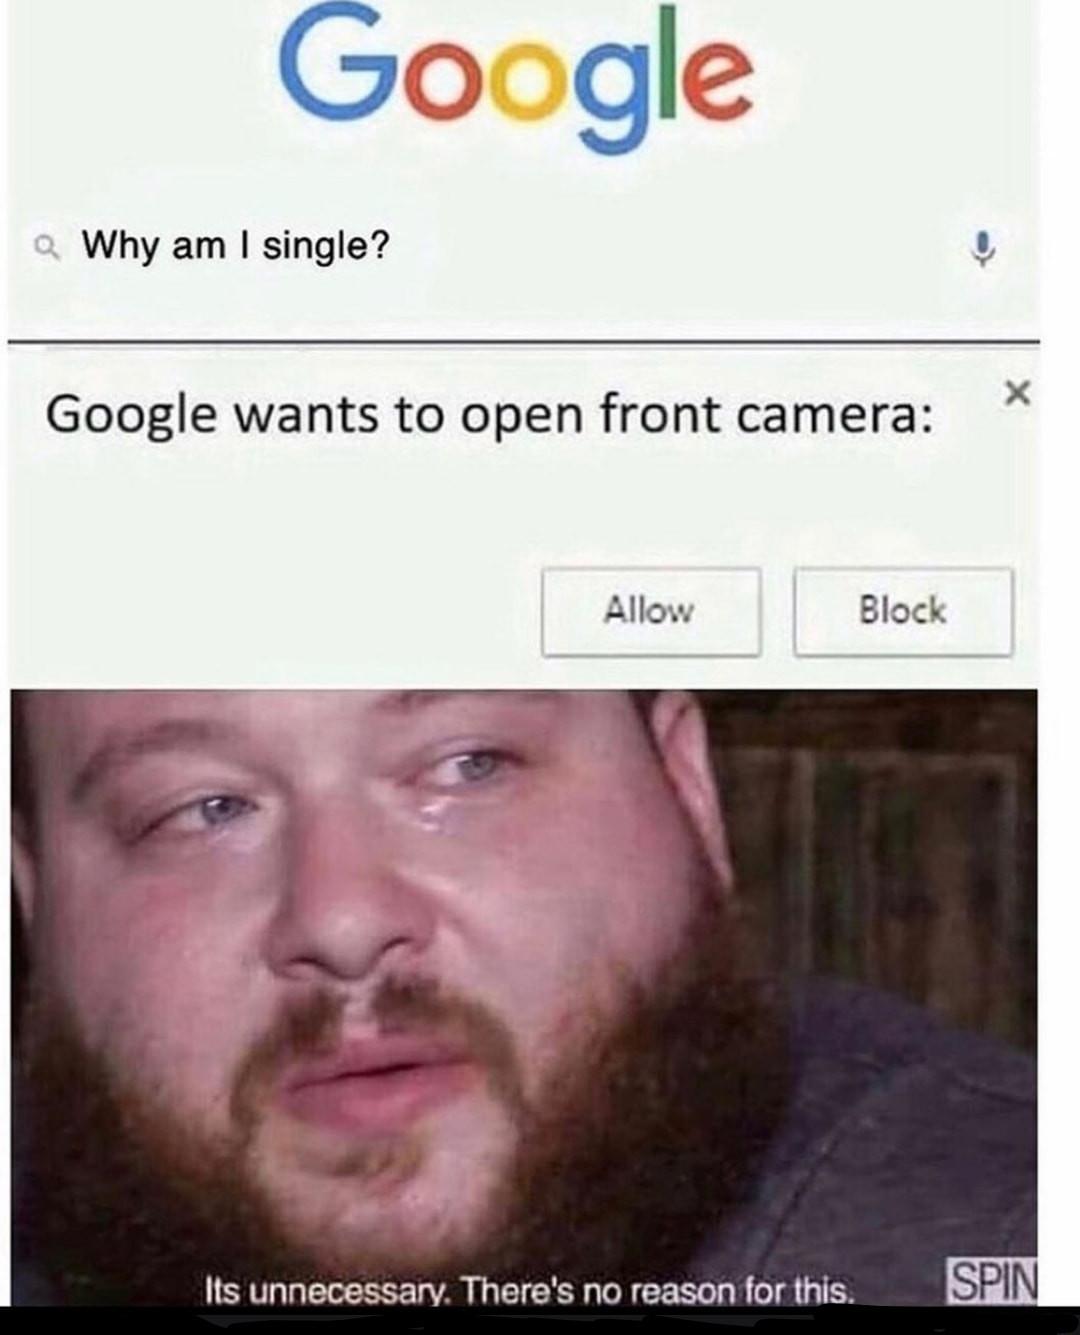 Dank, Google, BLOCK, Luke, ALLOW Dank Memes Dank, Google, BLOCK, Luke, ALLOW text: Google Why am I single? Google wants to open front camera: Allow Block SPI Its unnecessary. There's no reason for this..- 